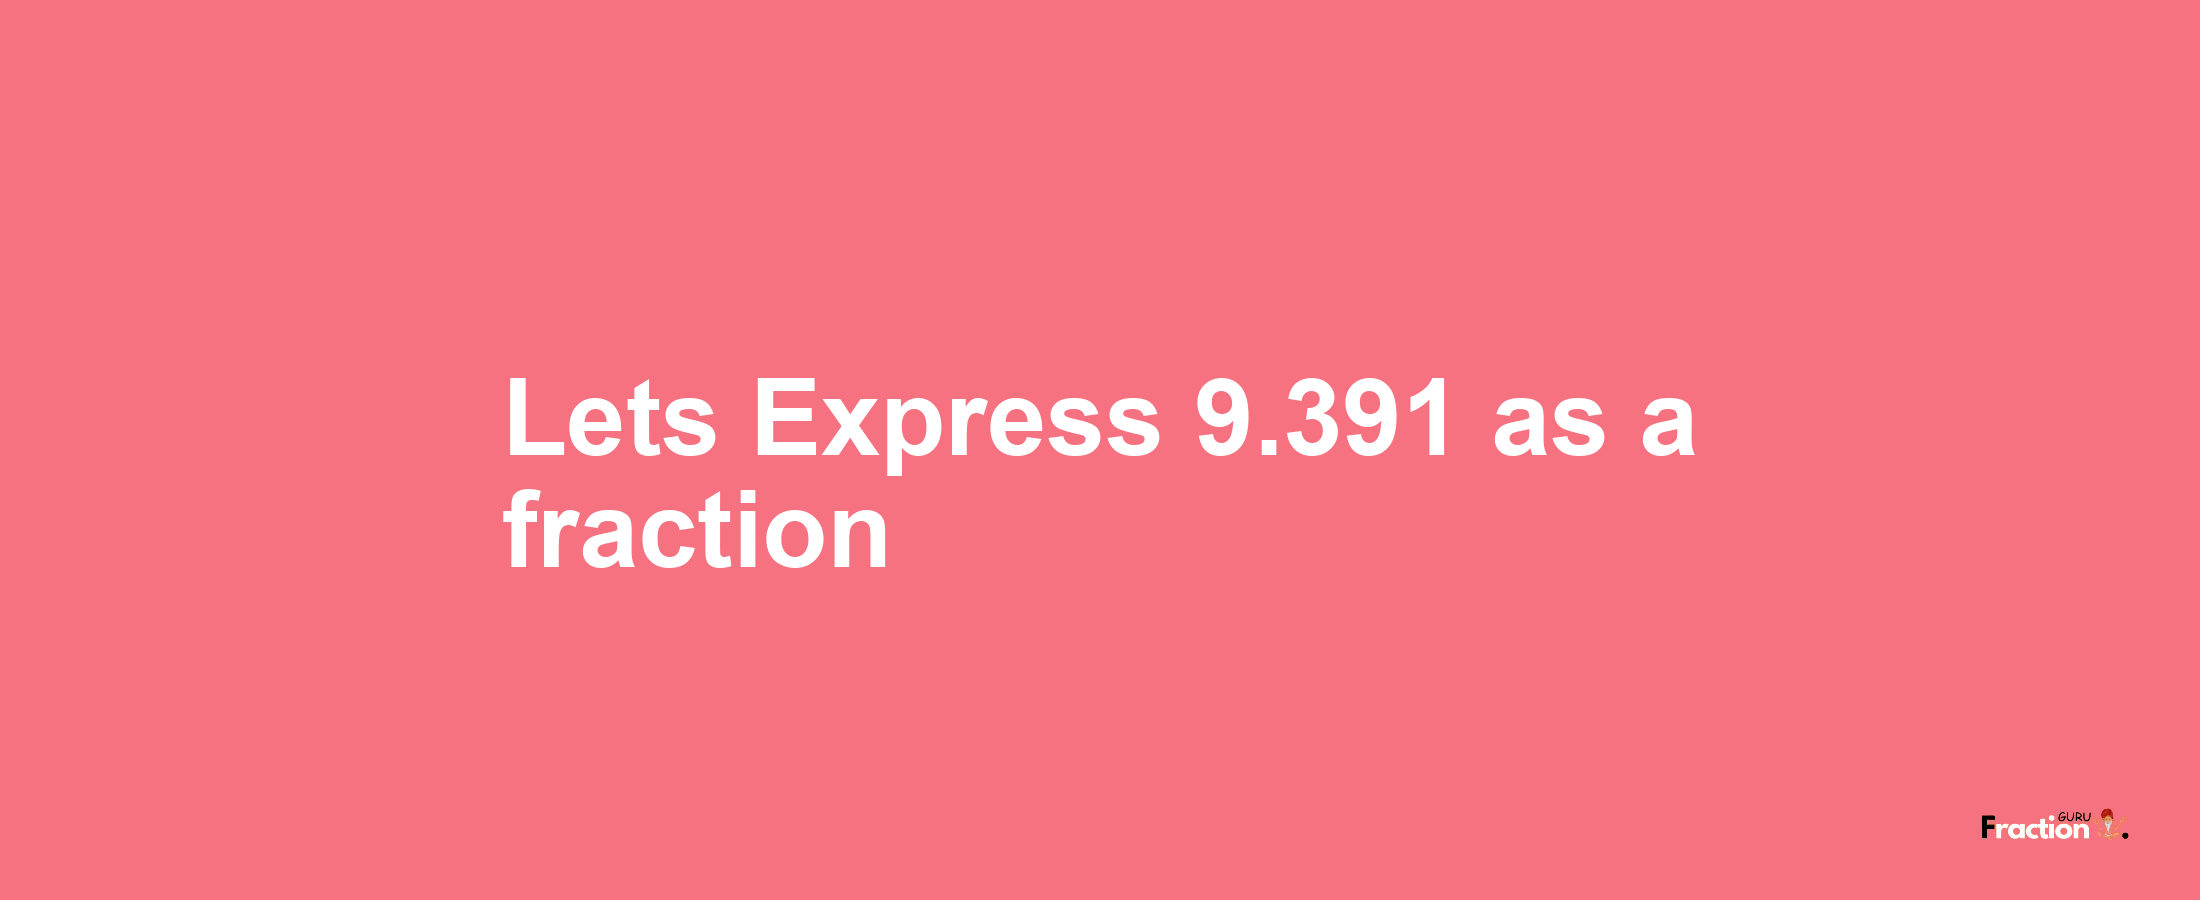 Lets Express 9.391 as afraction